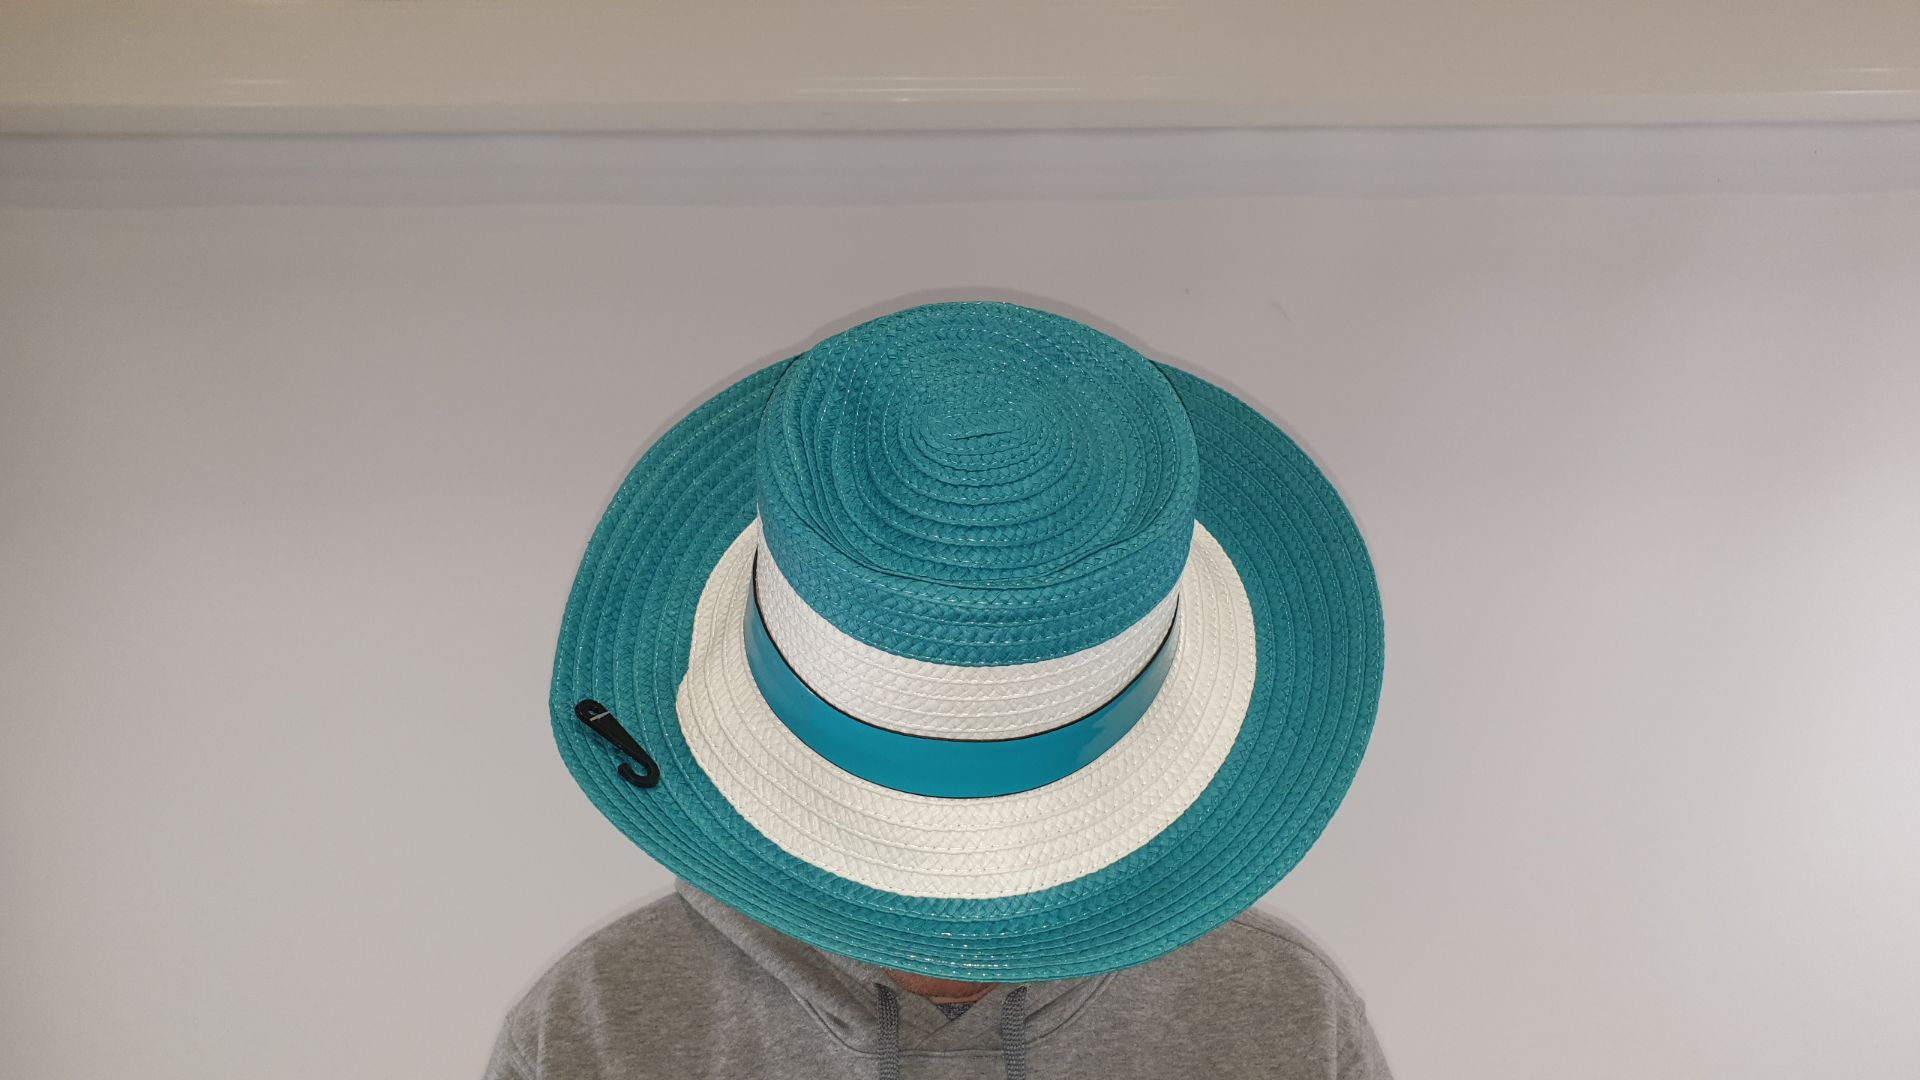 48 X TURQUOISE / WHITE SUMMER / CRICKET MALAGA HAT BY PIA ROSSINI - IN 2 CARTONS